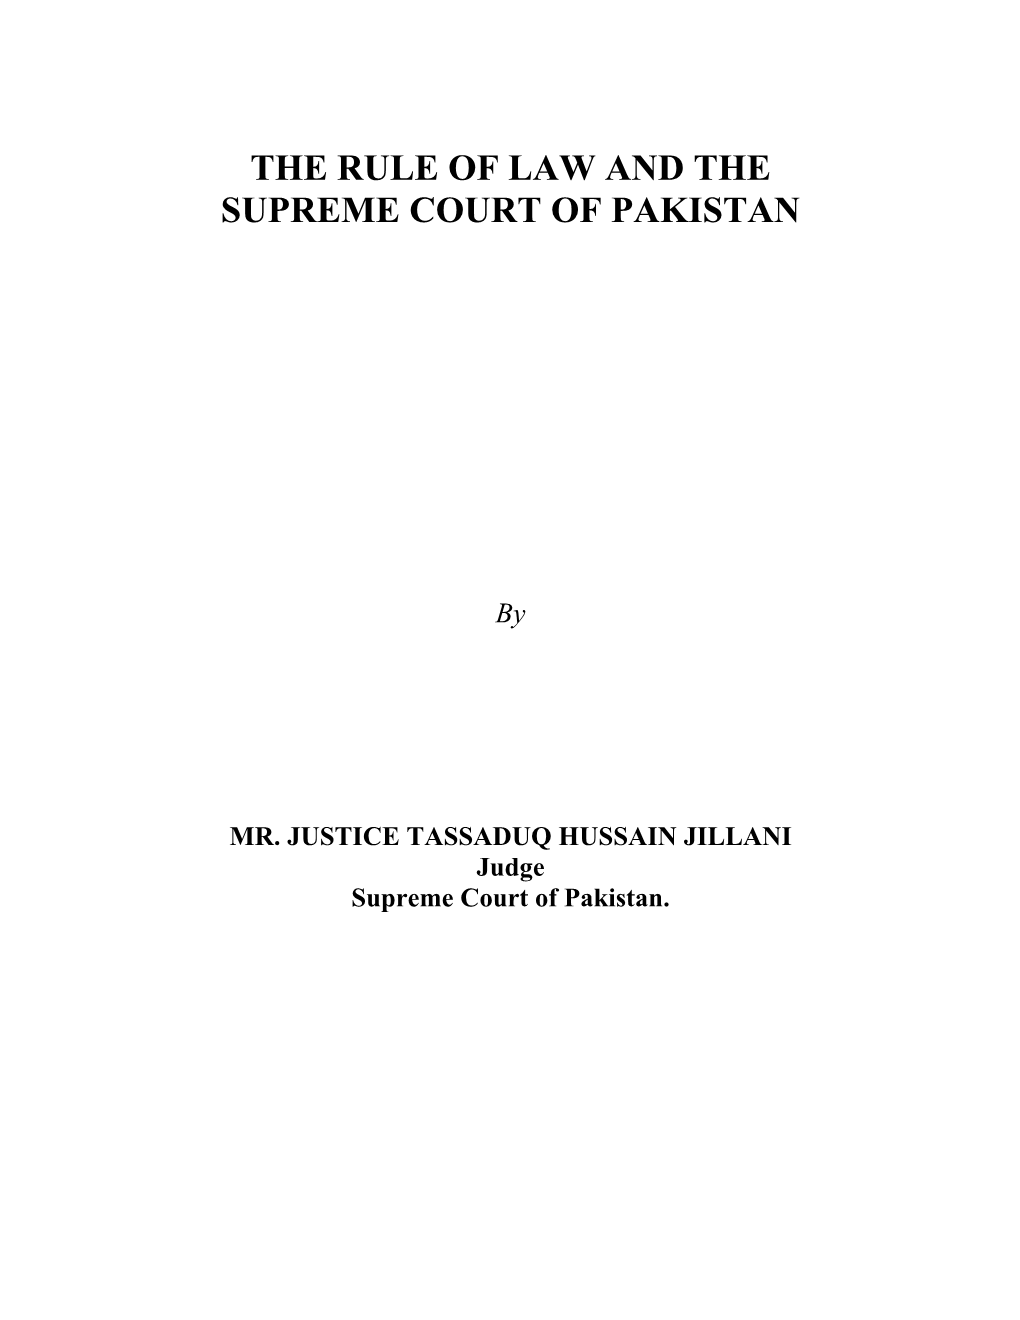 The Rule of Law and the Supreme Court of Pakistan